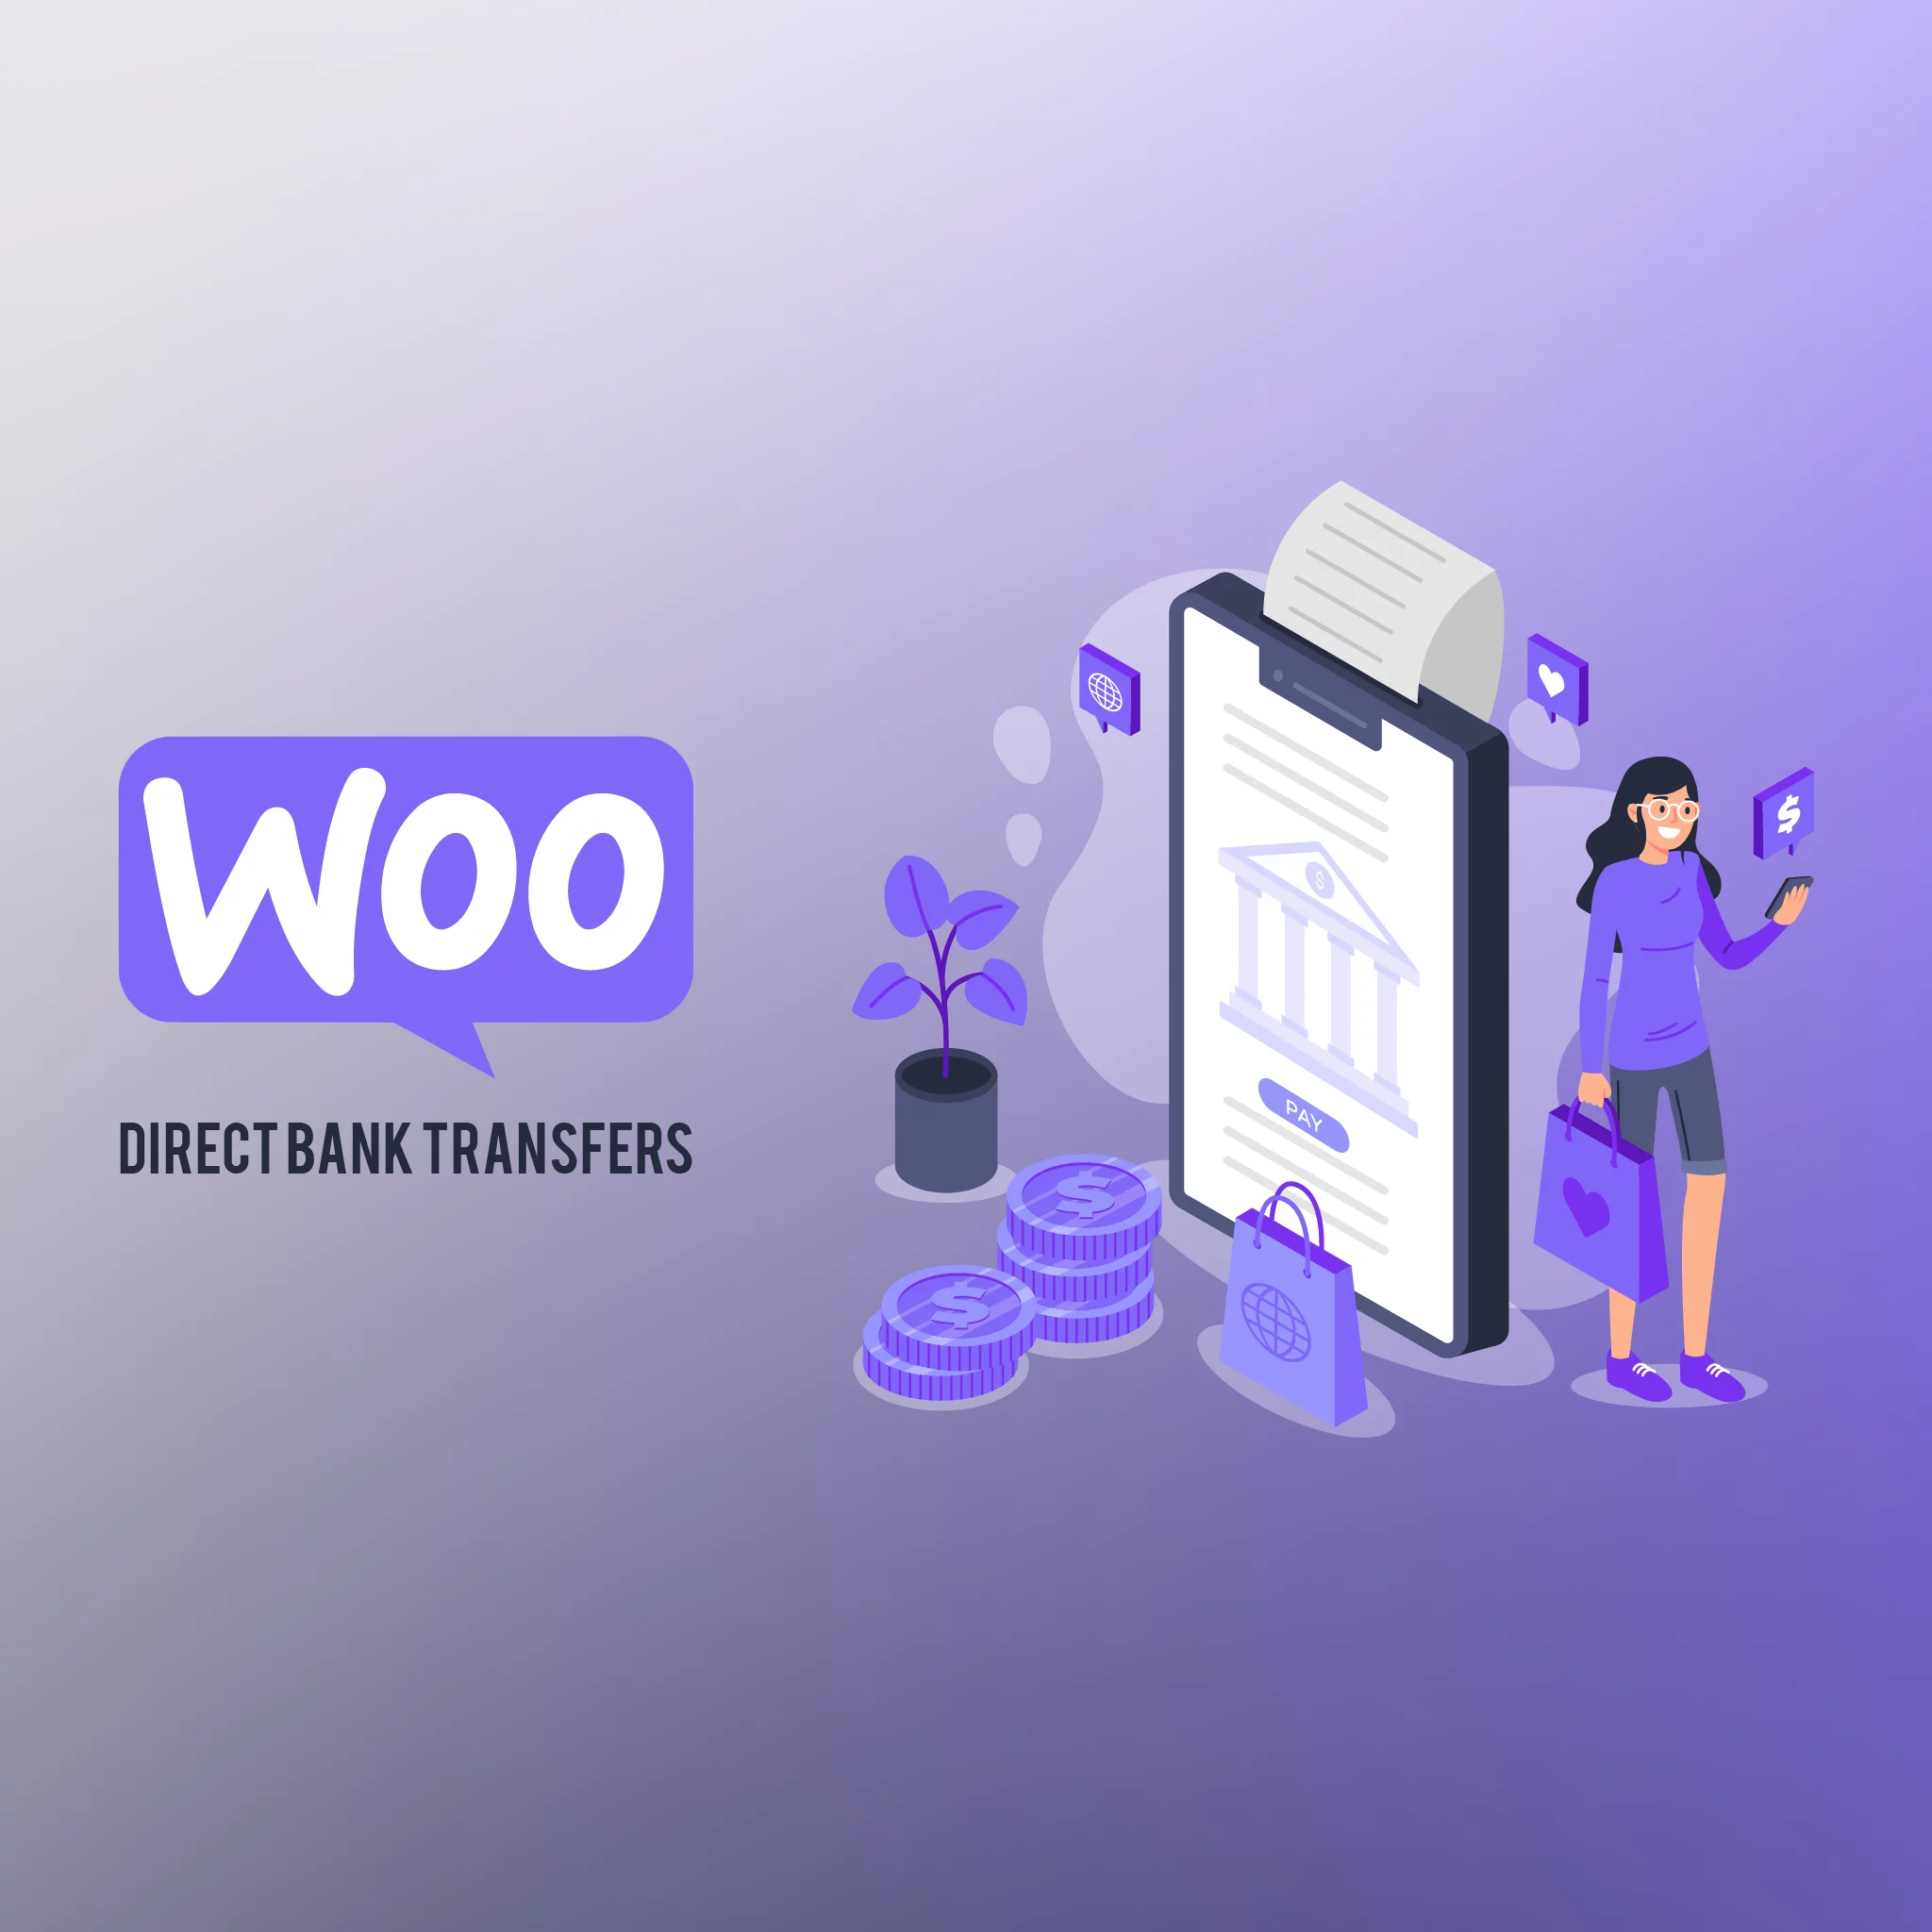 Girl making an online purchase using Direct bank transfer in WooCommerce.